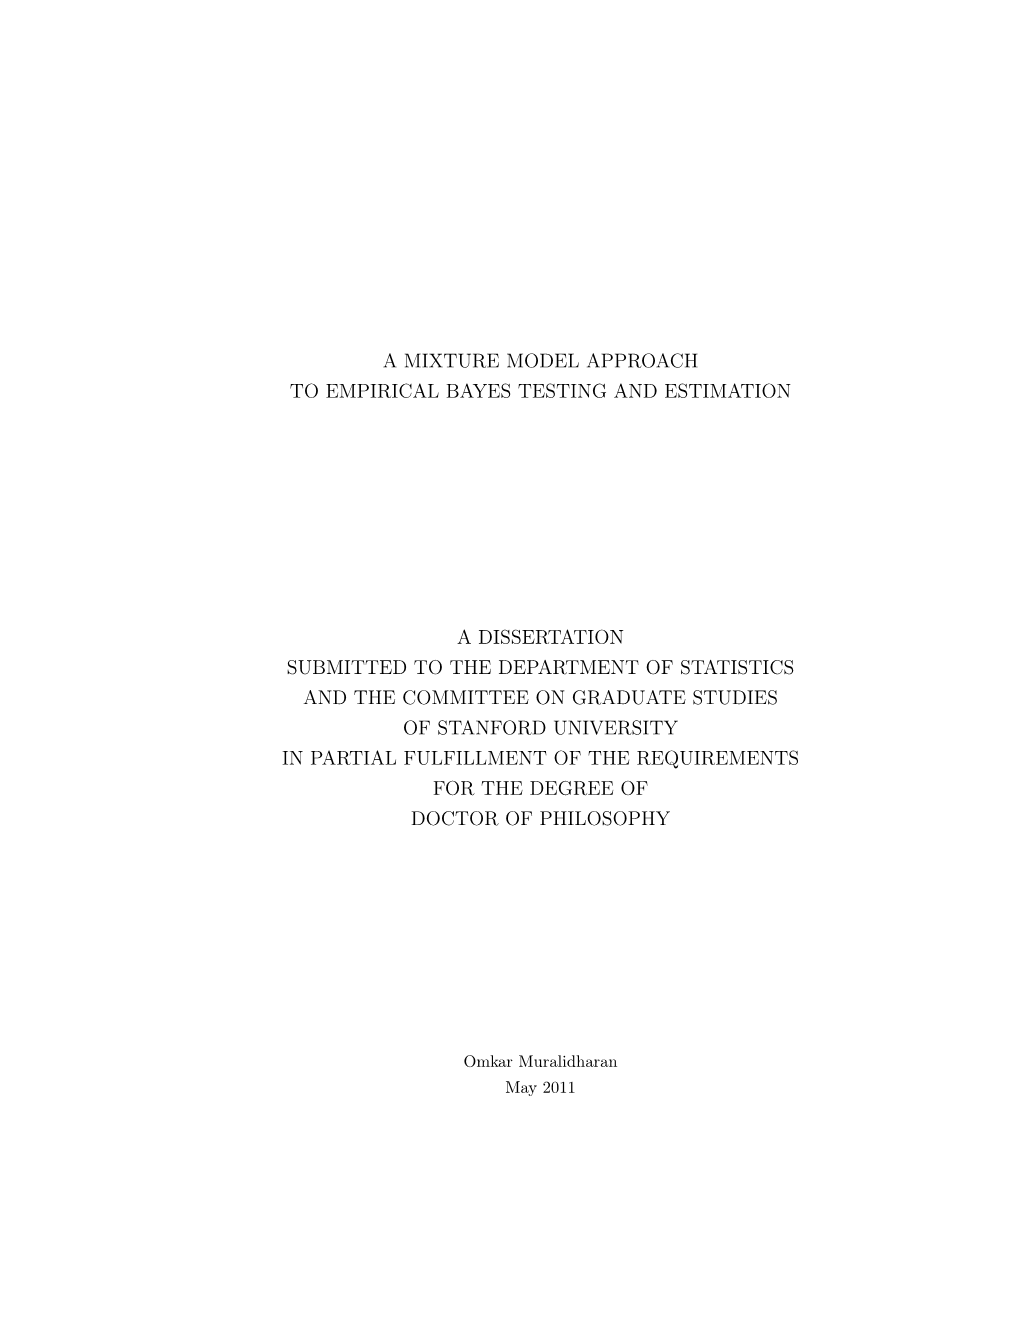 A Mixture Model Approach to Empirical Bayes Testing and Estimation a Dissertation Submitted to the Department of Statistics